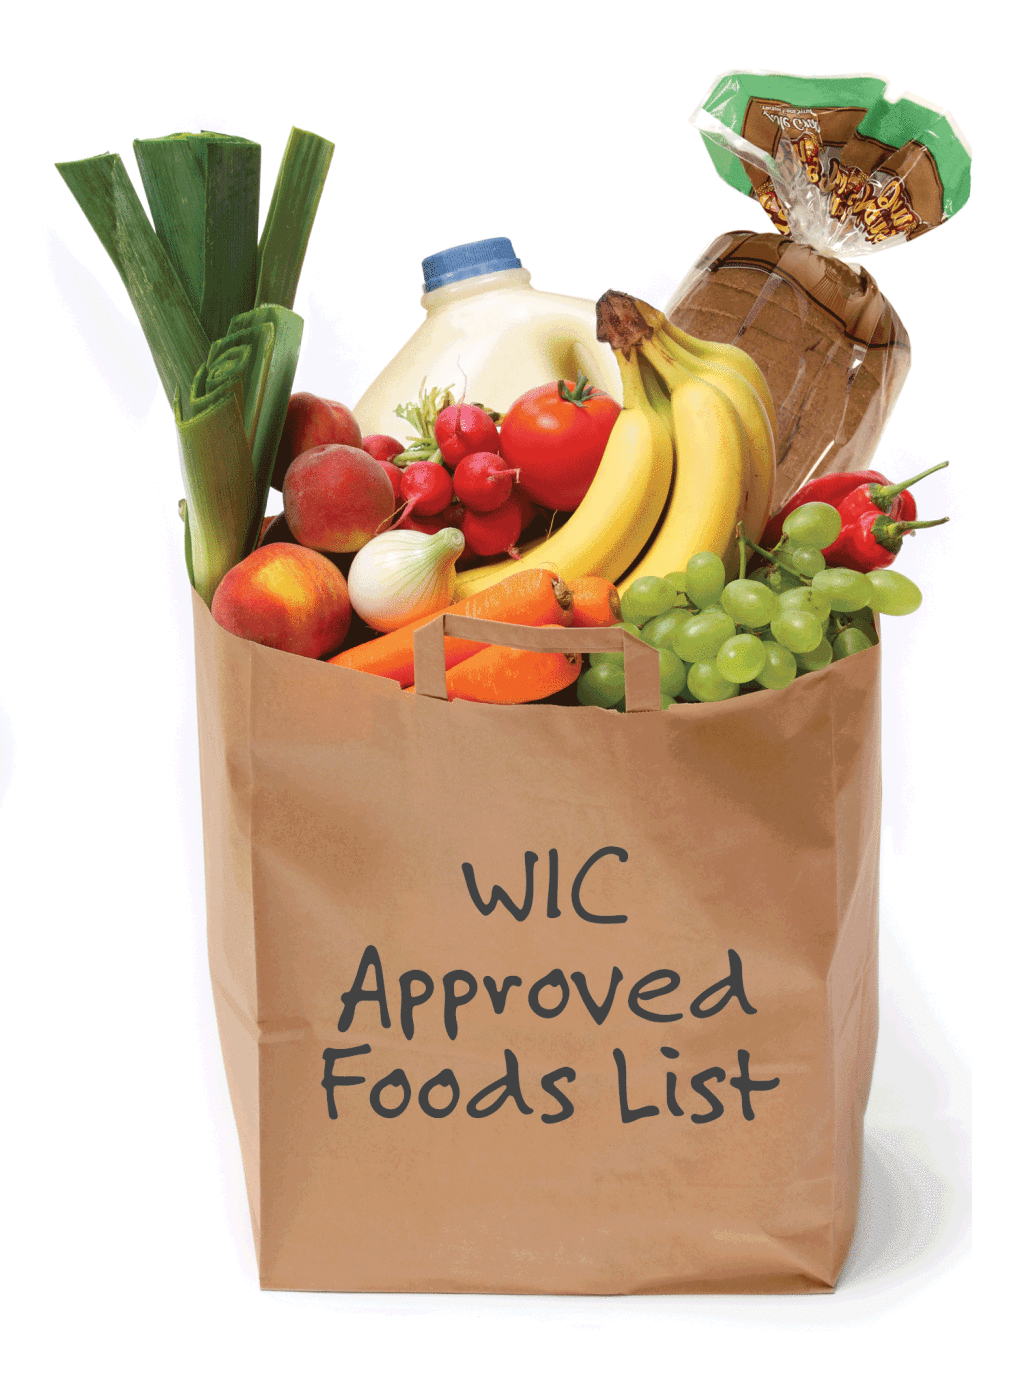 wic approved foods 2019 colorsdo